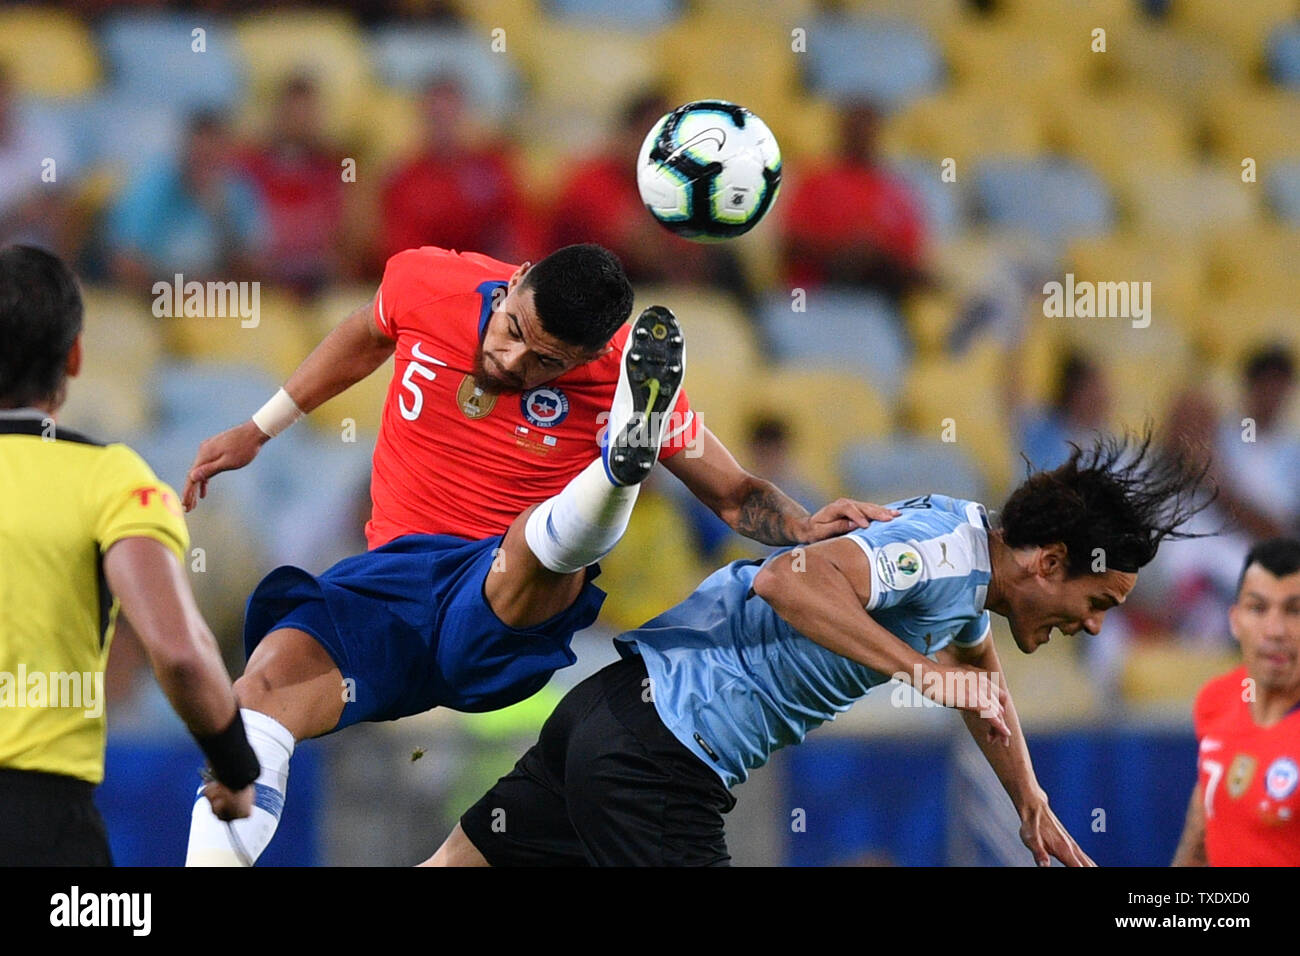 Rio De Janeiro, Brazil. 24th June, 2019. Uruguay's Edinson Cavani (2nd R) vies with Paulo Diaz (2nd L) of Chile during the Copa America 2019 Group C match between Uruguay and Chile in Rio de Janeiro, Brazil, June 24, 2019. Uruguay won 1-0. Credit: Xin Yuewei/Xinhua/Alamy Live News Stock Photo